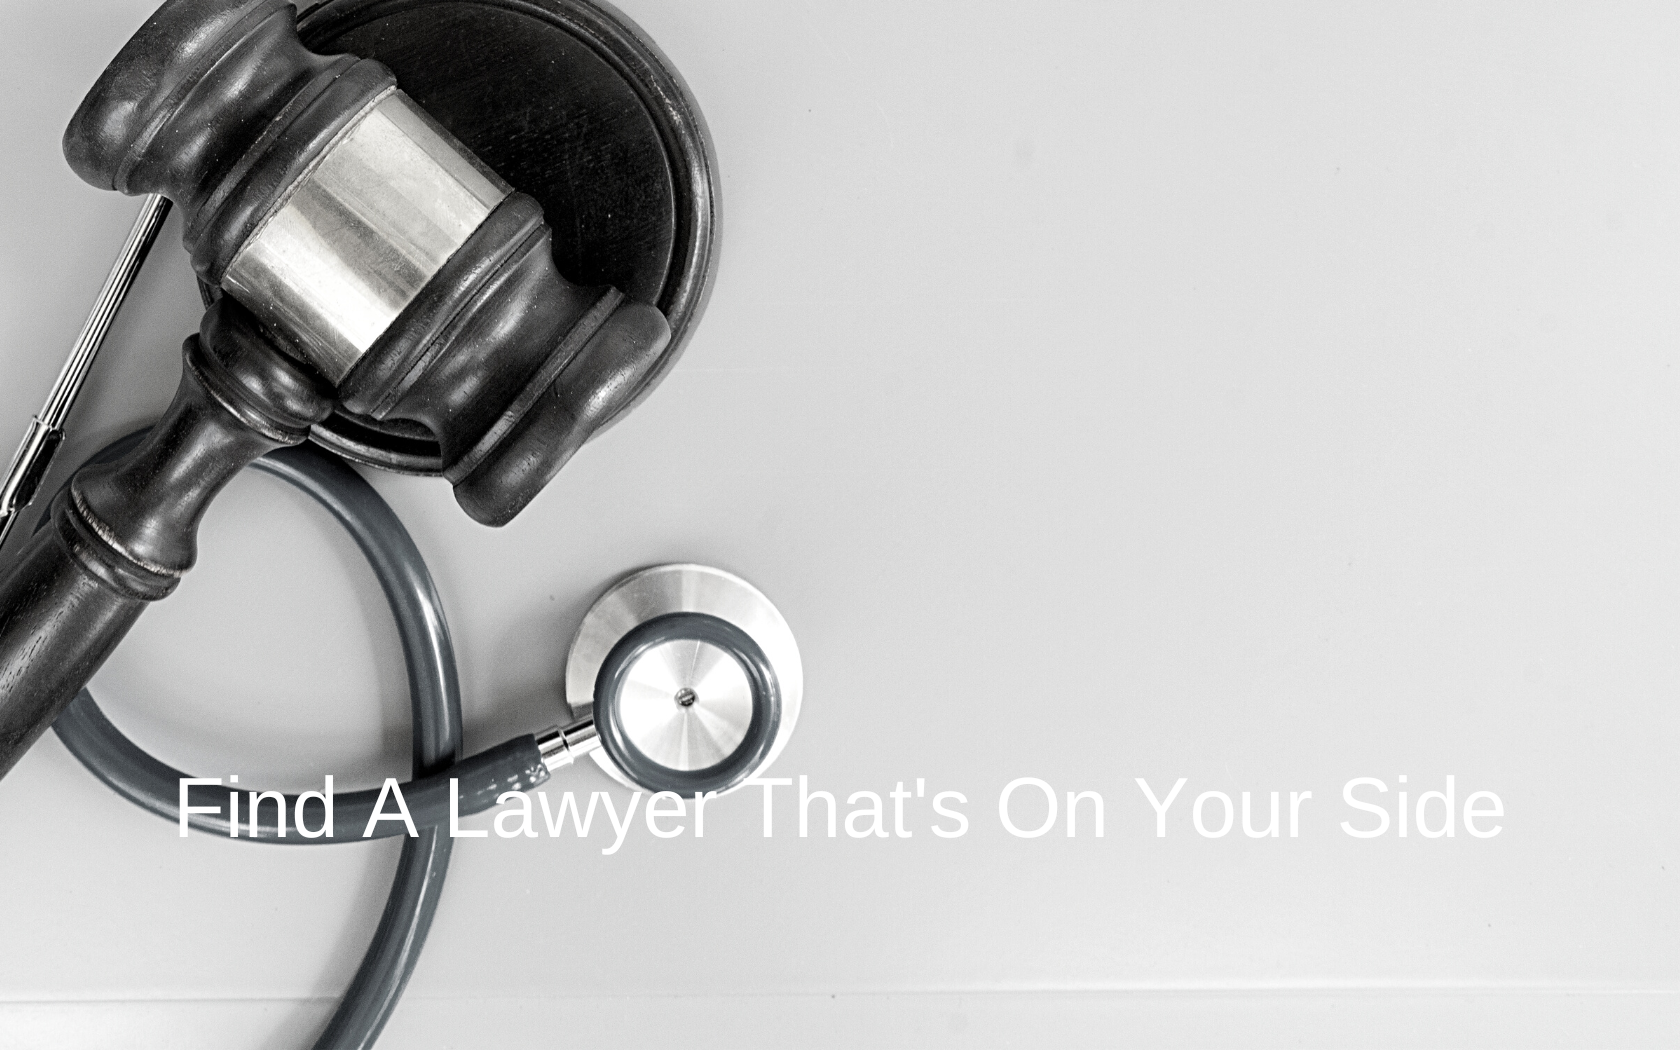 A medical malpractice lawyer is knowledgable in medicine as well as law.